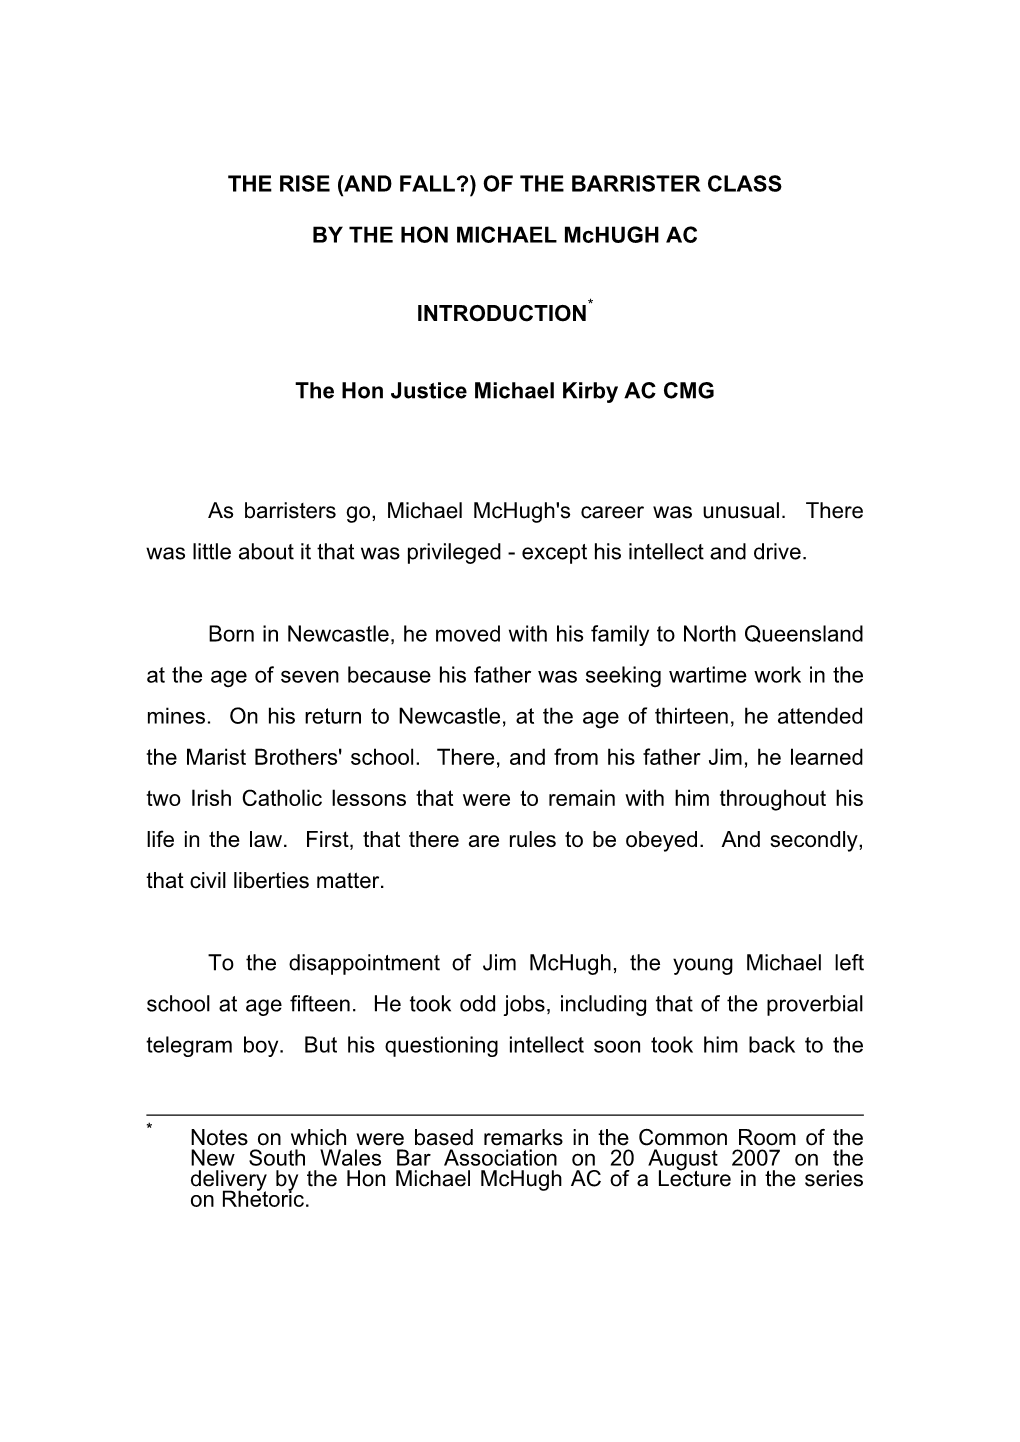 Of the Barrister Class by the Hon Michael Mchugh AC, Introduction